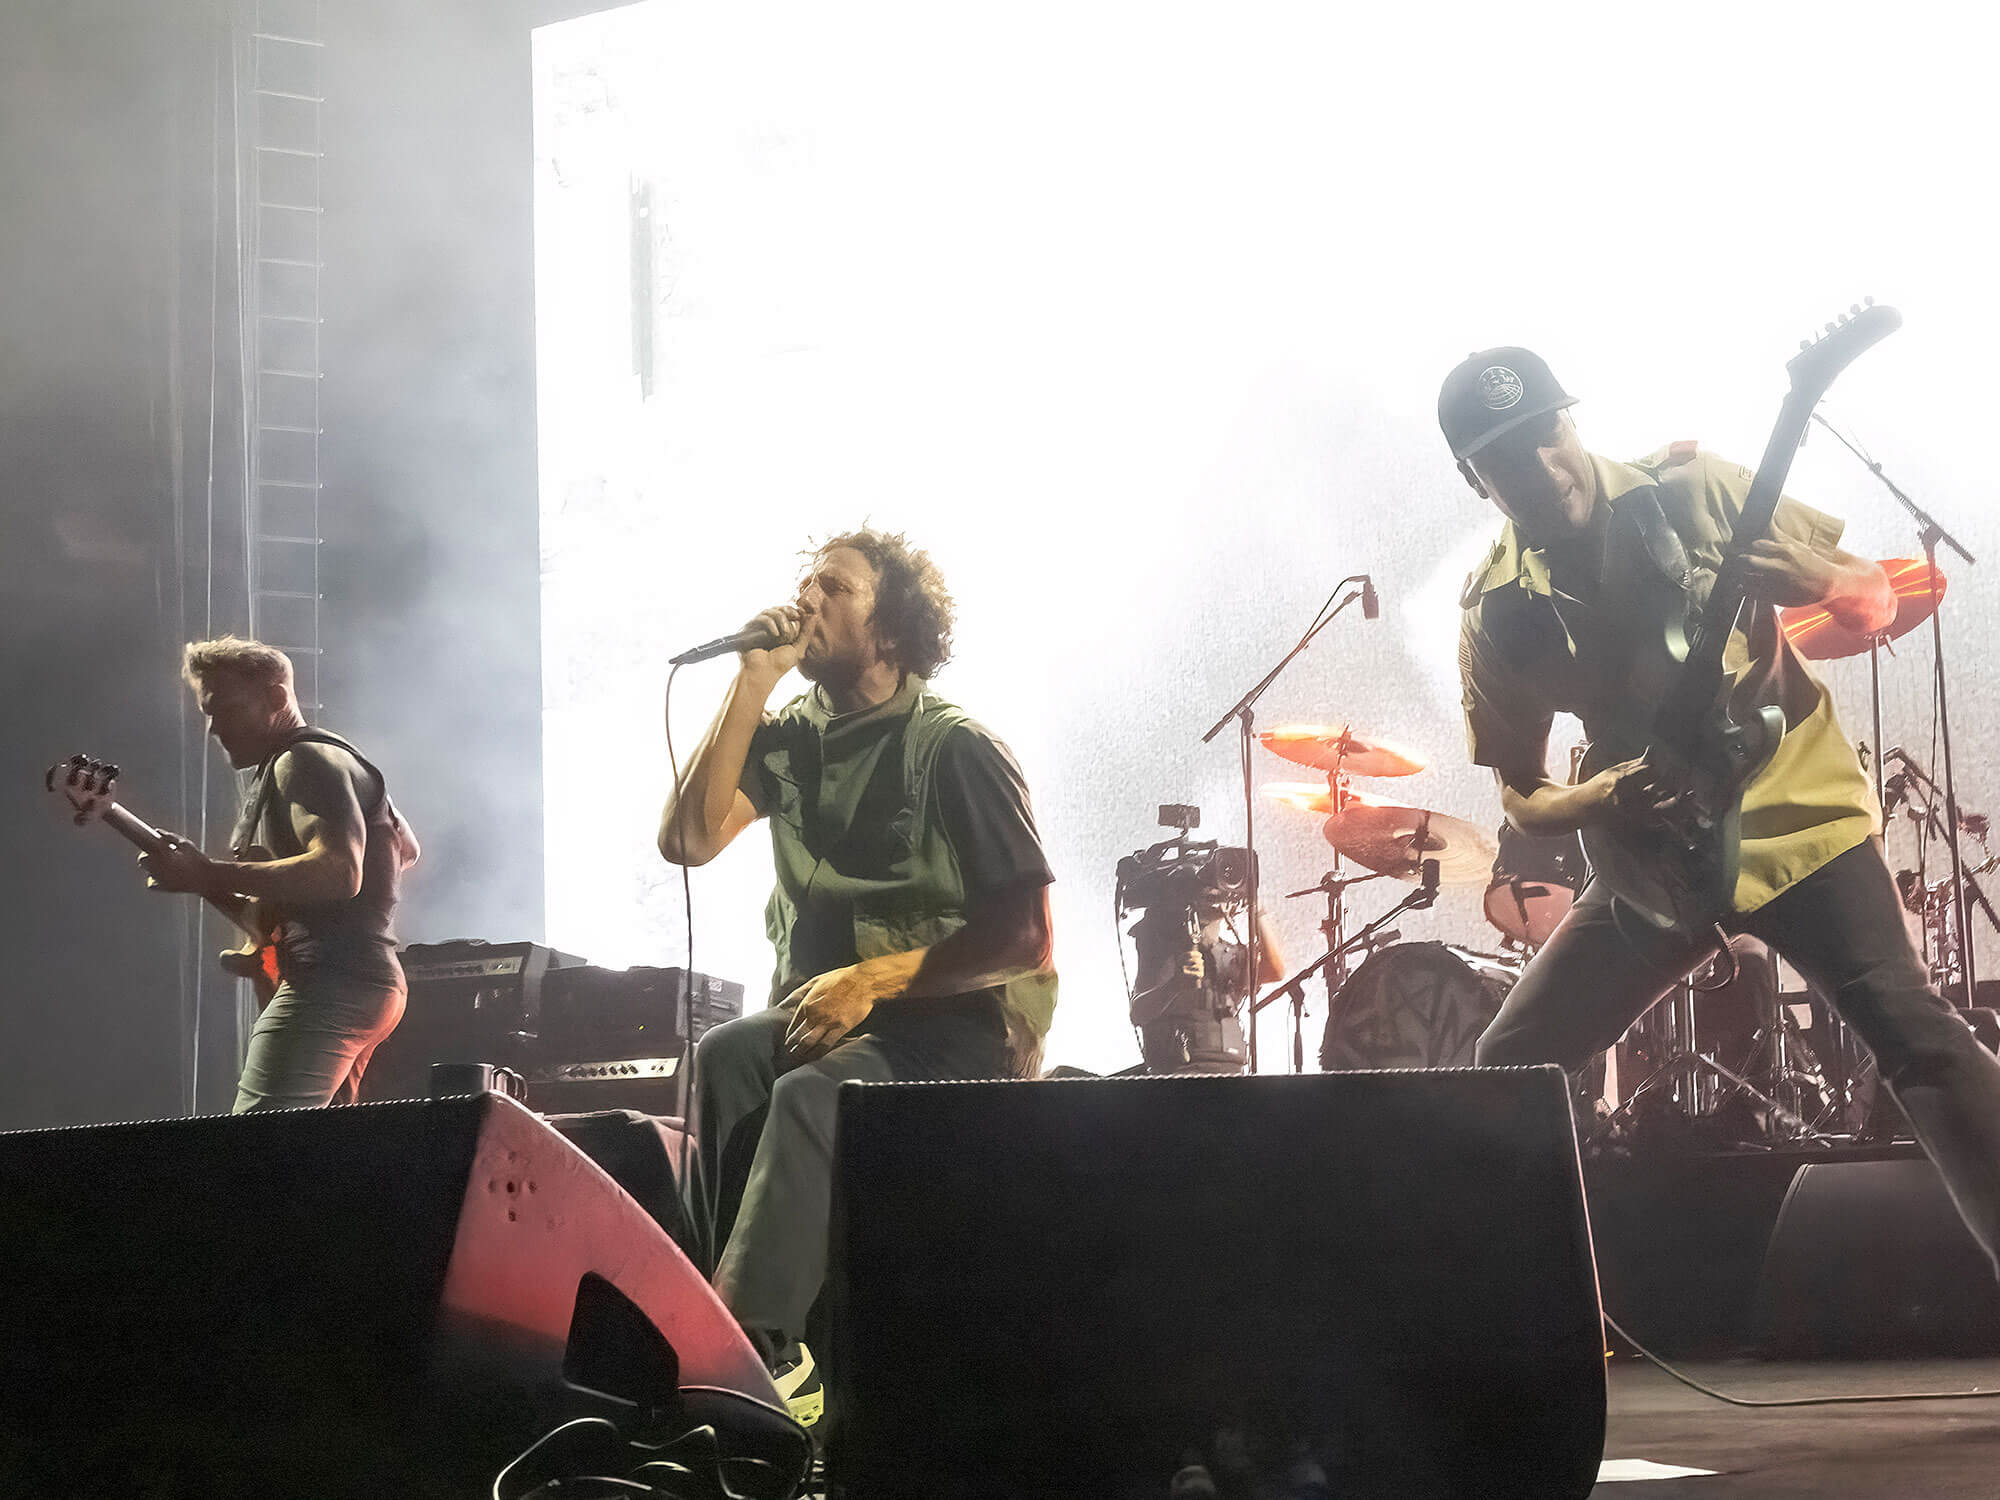 Rage Against the Machine performing live